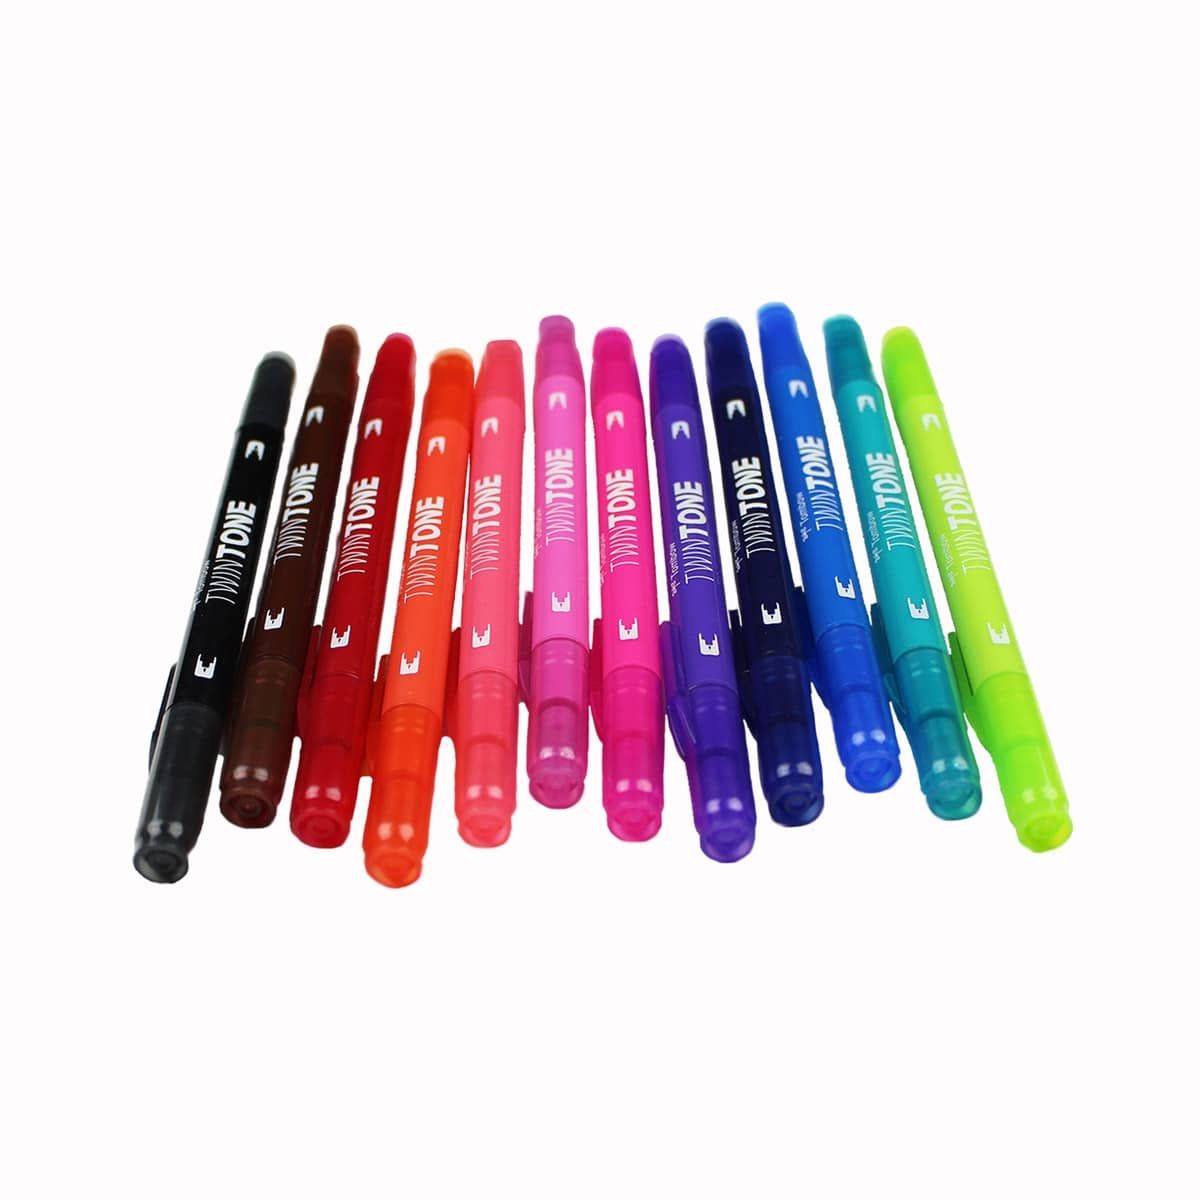 TwinTone Dual-TIp Marker Sets - Brights